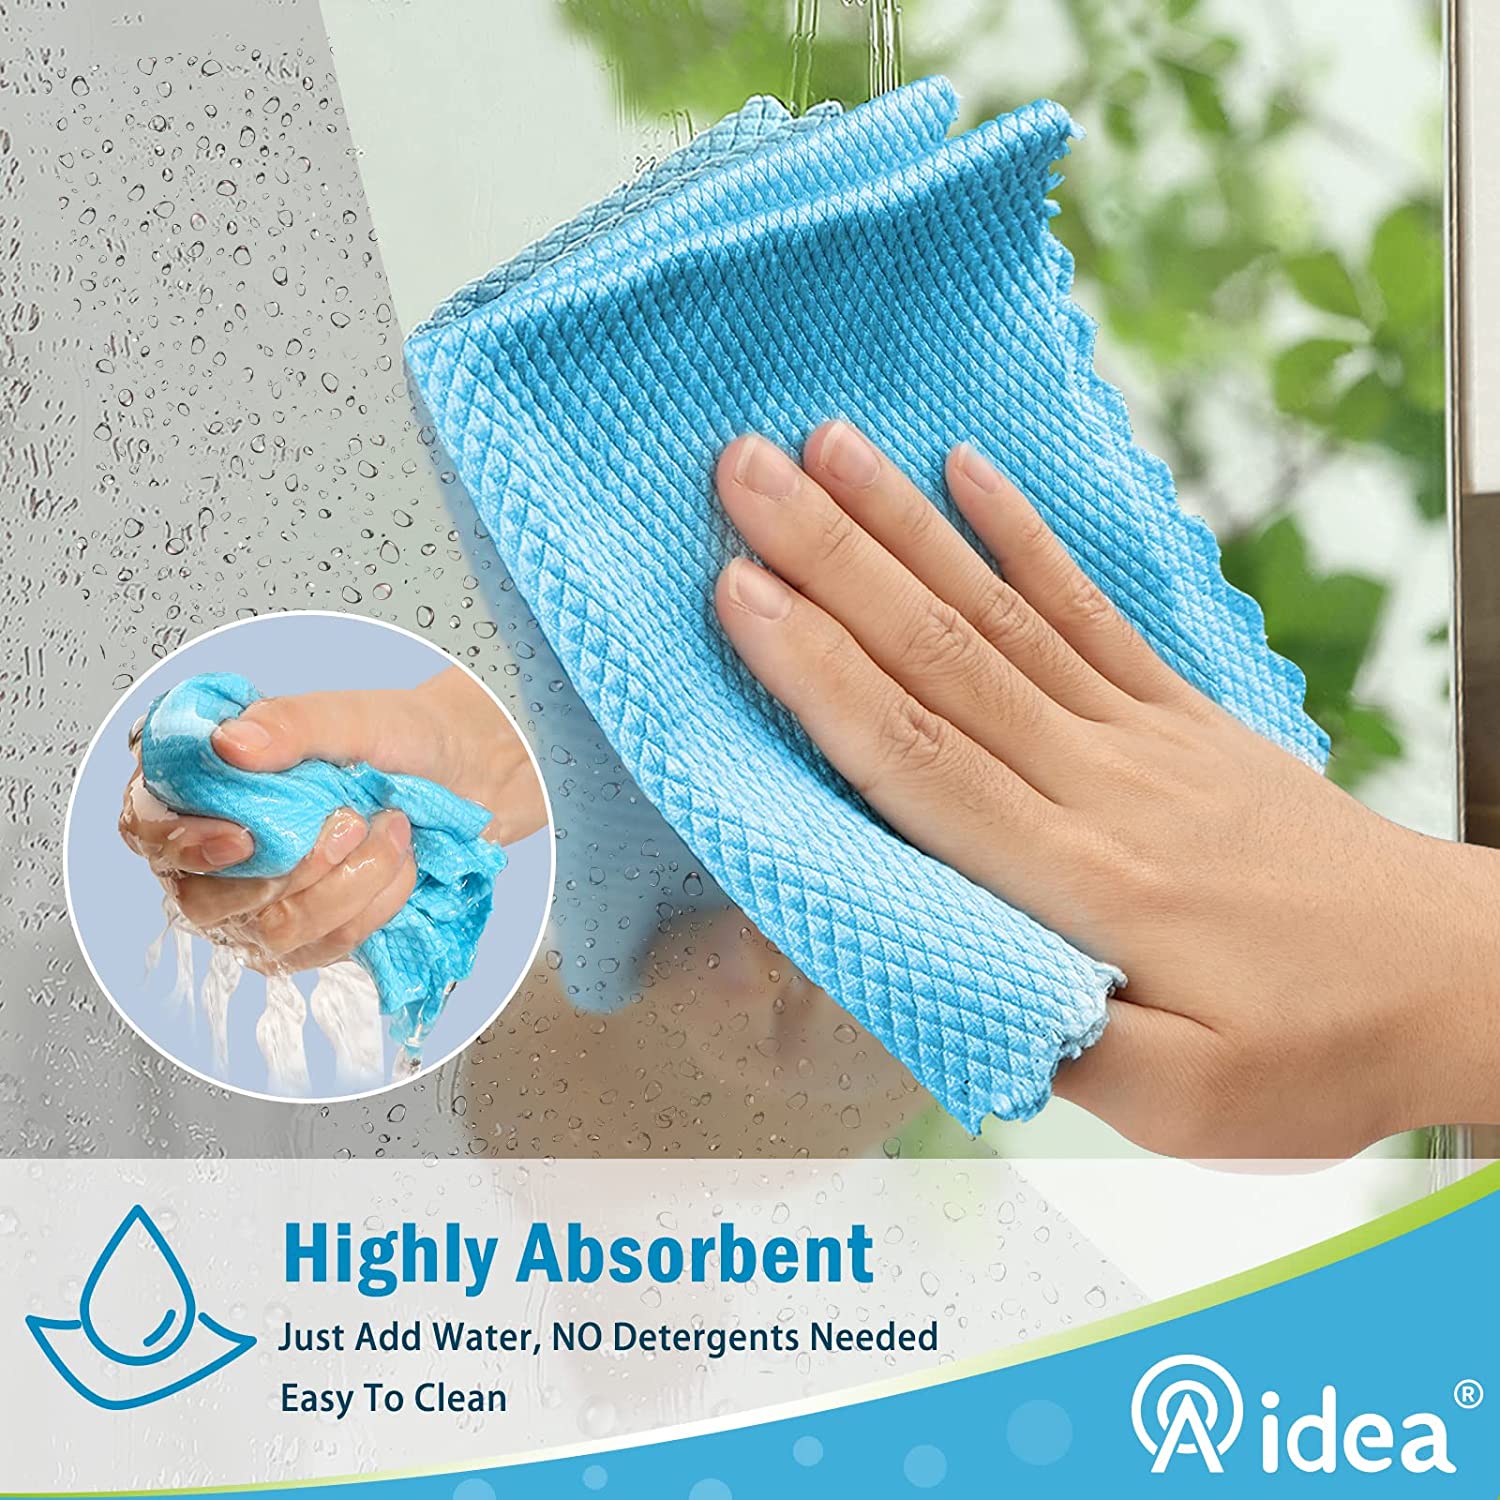 AIDEA Microfiber Cleaning Cloths-8PK, Softer Highly Absorbent, Lint Free  Streak Free for House, Kitchen, Car, Window Gifts